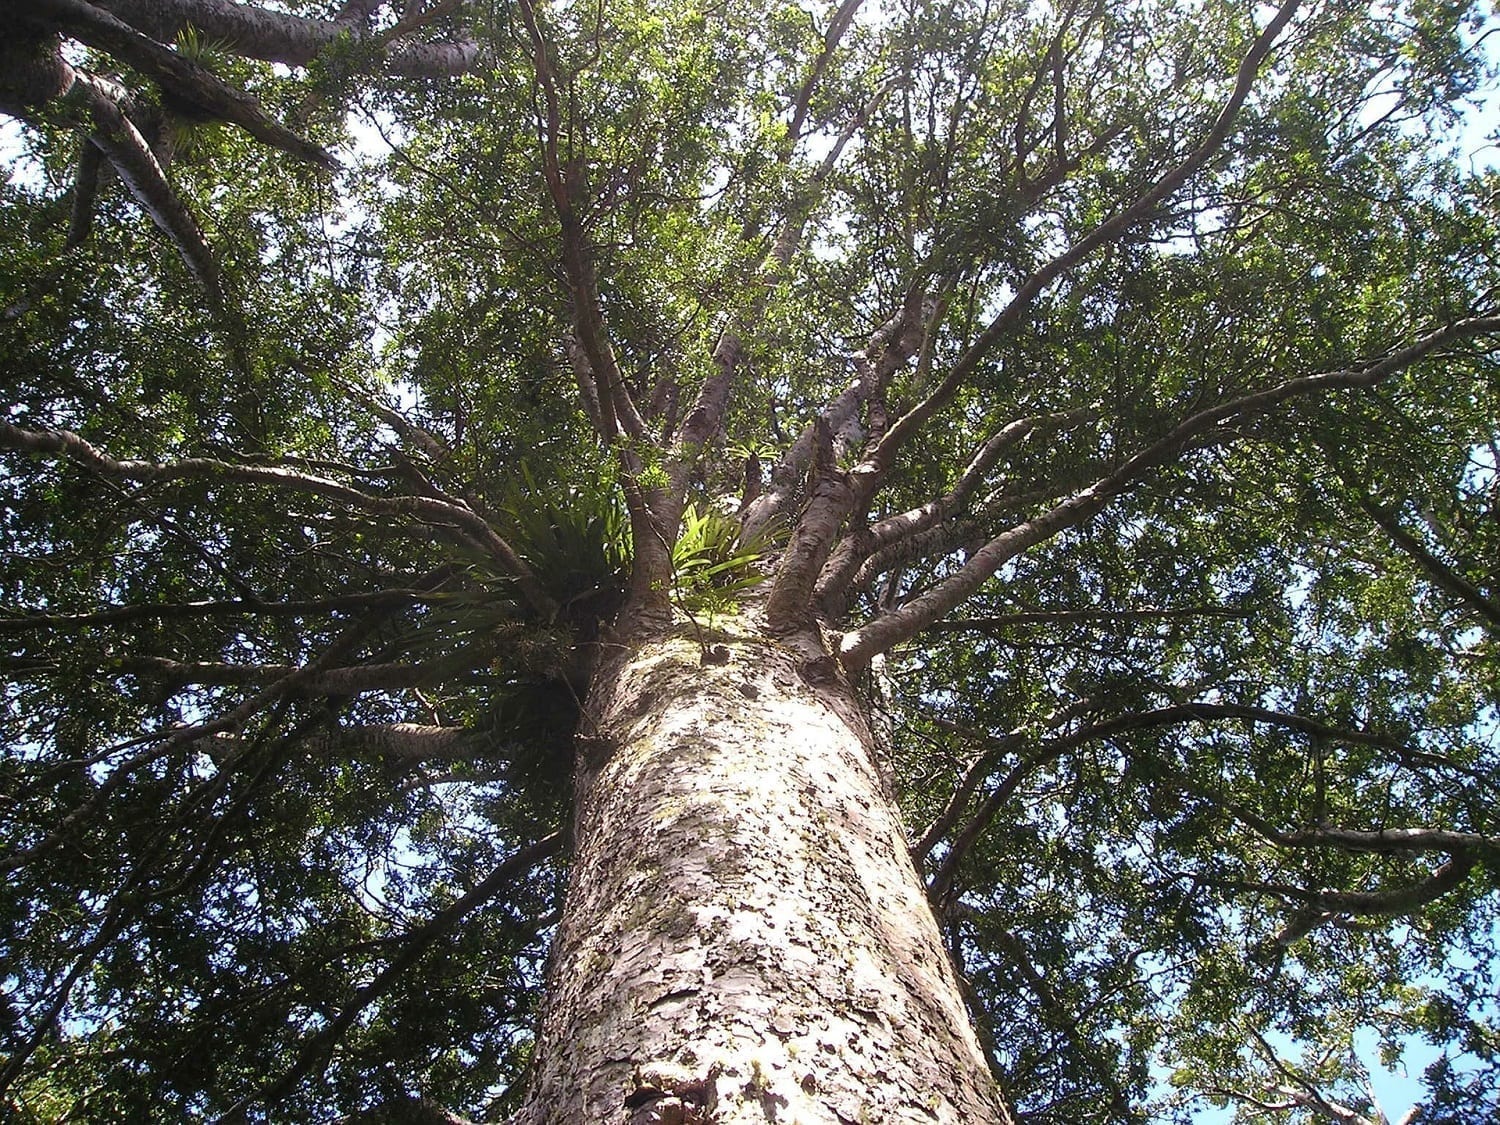 Crown of a Kauri Tree growing in New Zealand today